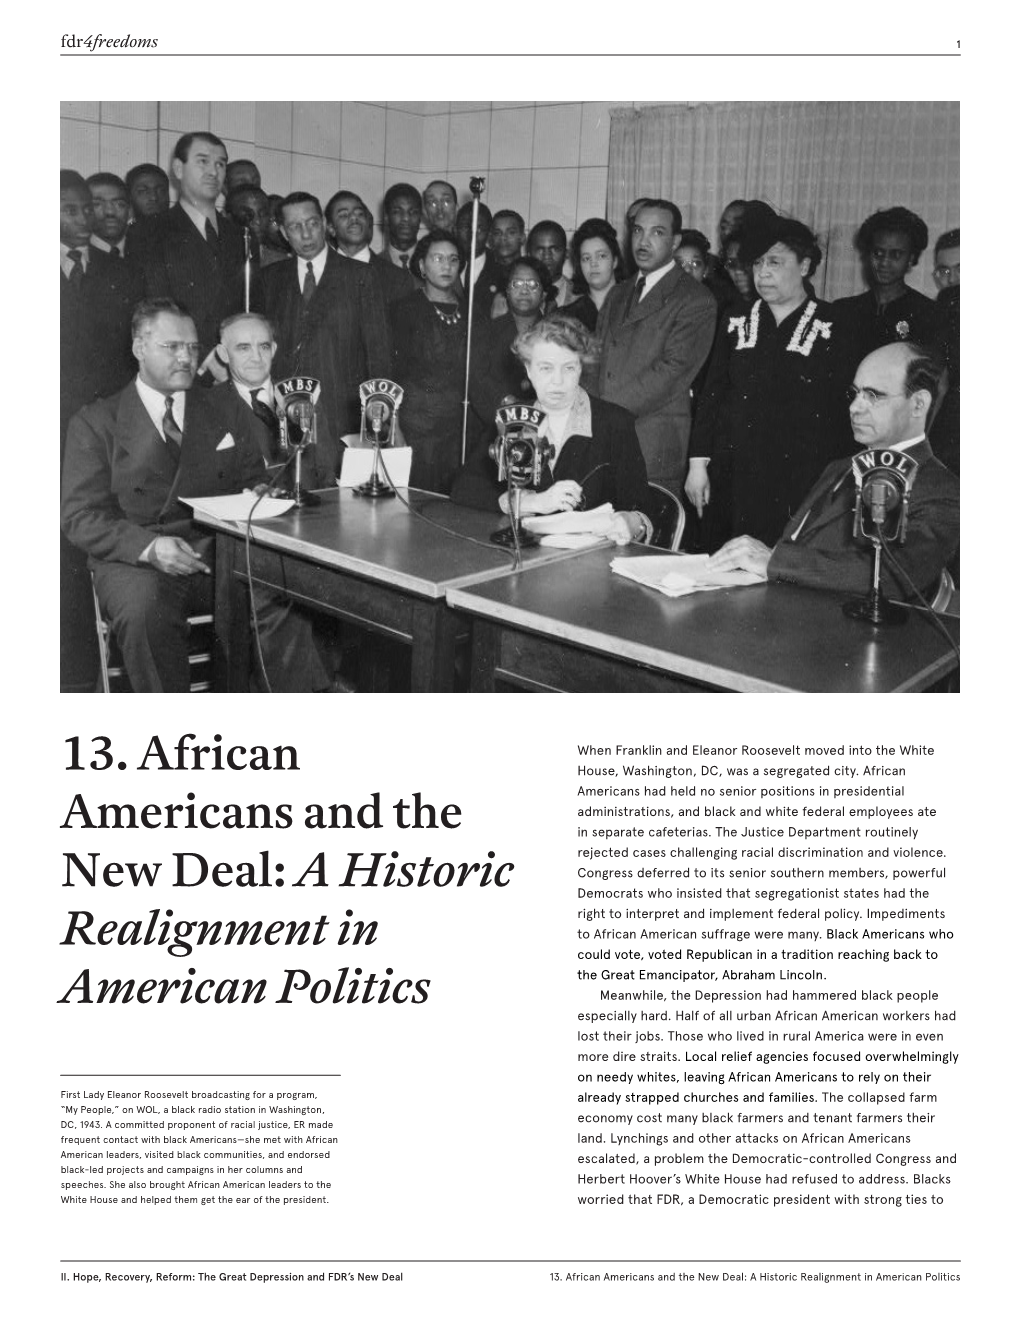 13. African Americans and the New Deal: a Historic Realignment in American Politics Fdr4freedoms 2